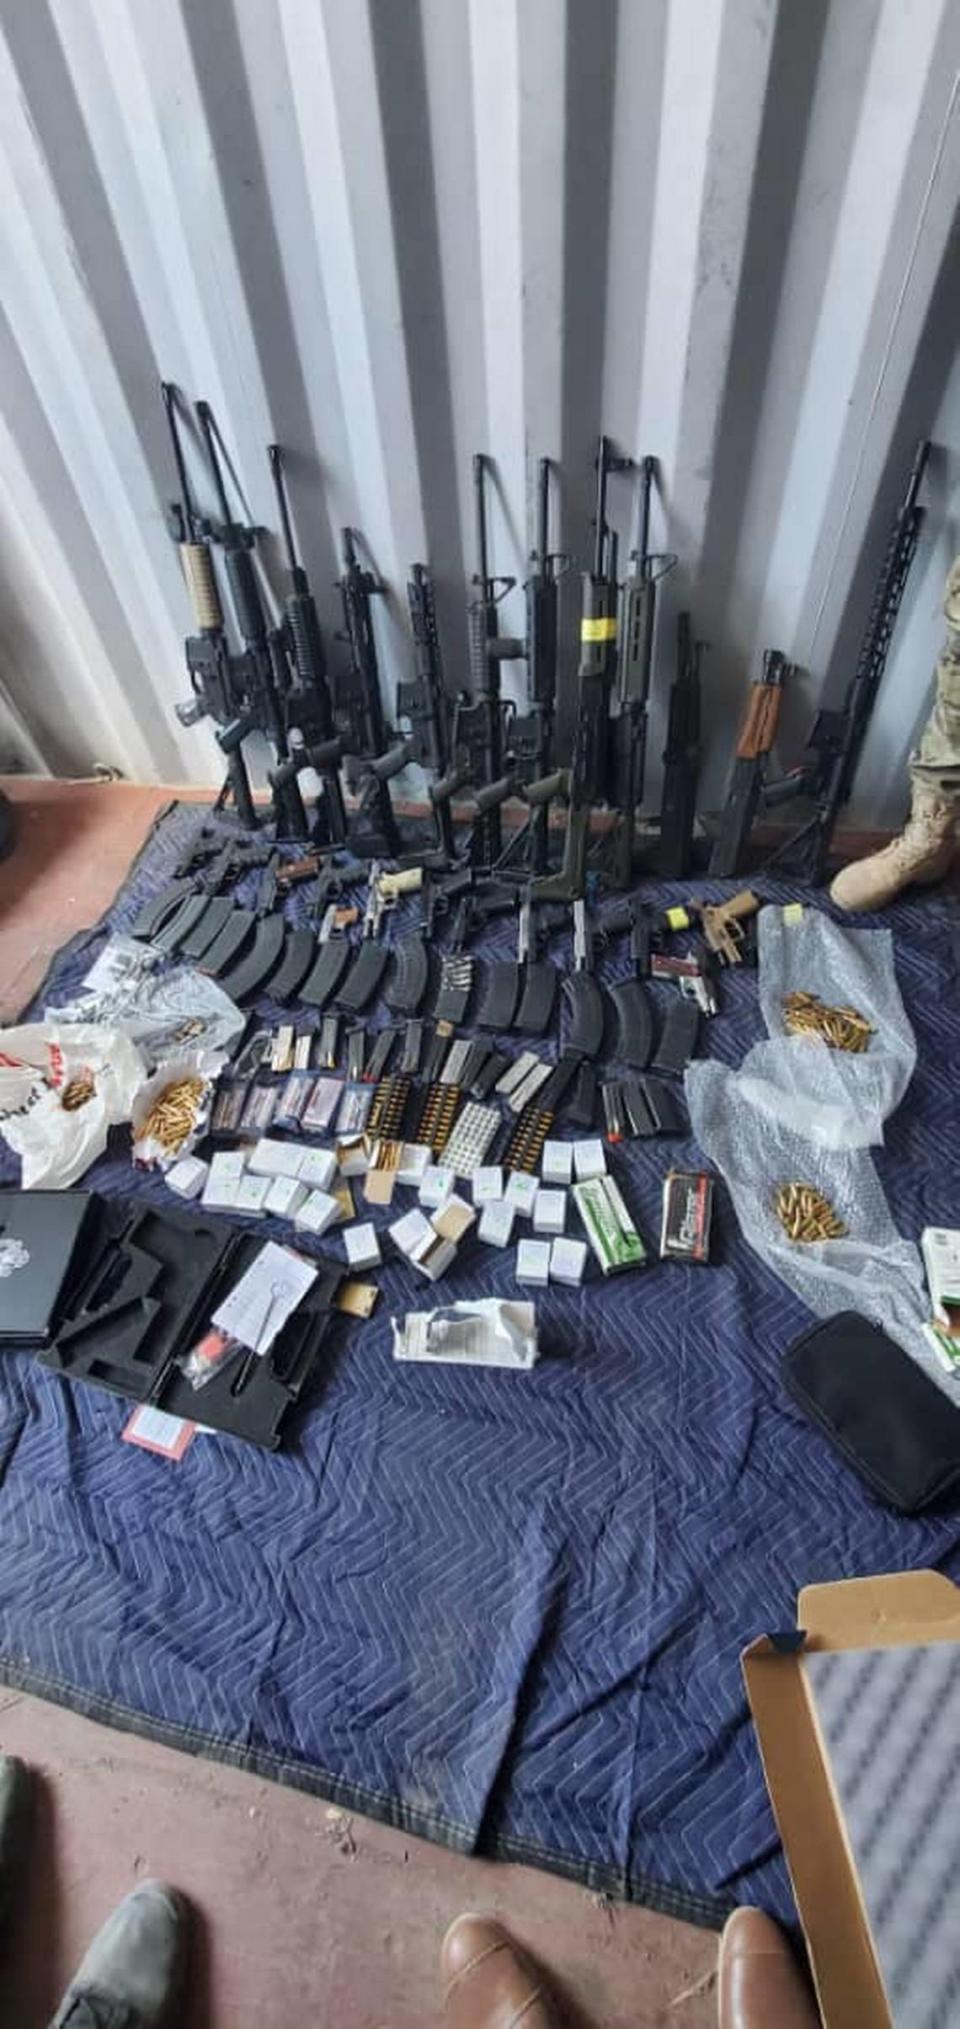 During a joint operation in the city of Cap-Haïtien, Haitian police and customs inspectors discovered a cache of arms in two boxes that arrived in a container from South Florida.